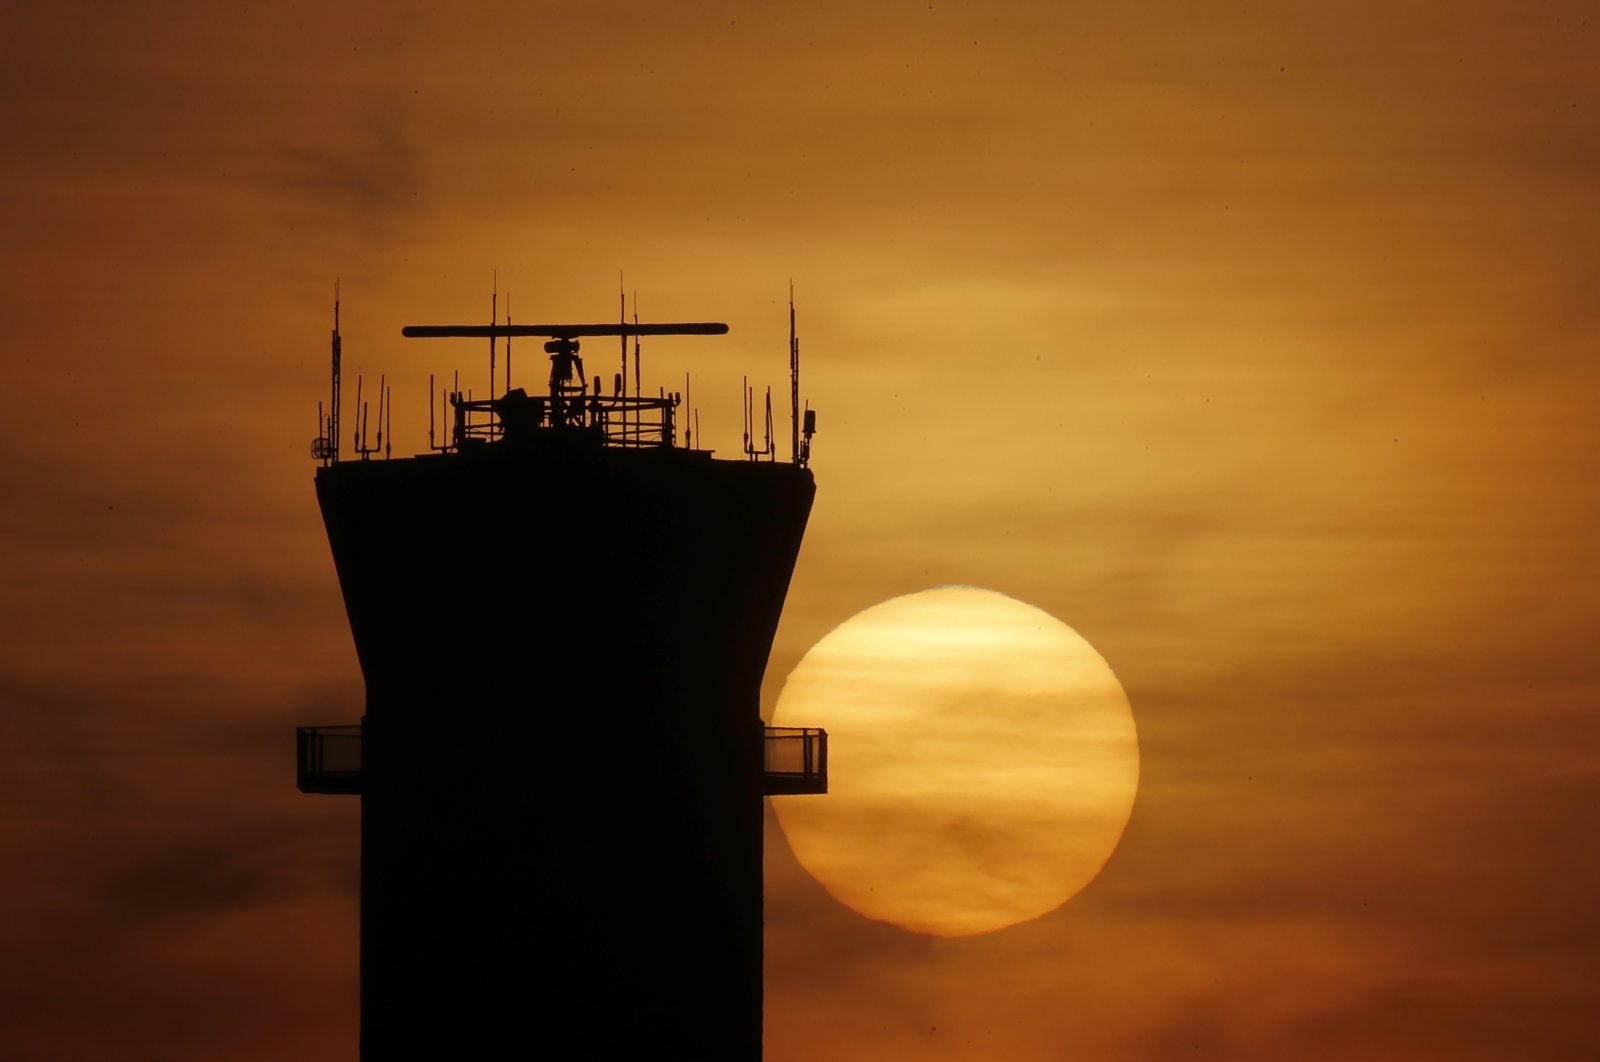 The sun sets behind the FAA Control Tower at Chicago's Midway International Airport on Tuesday, March 17, 2020, in Chicago. (AP Photo)